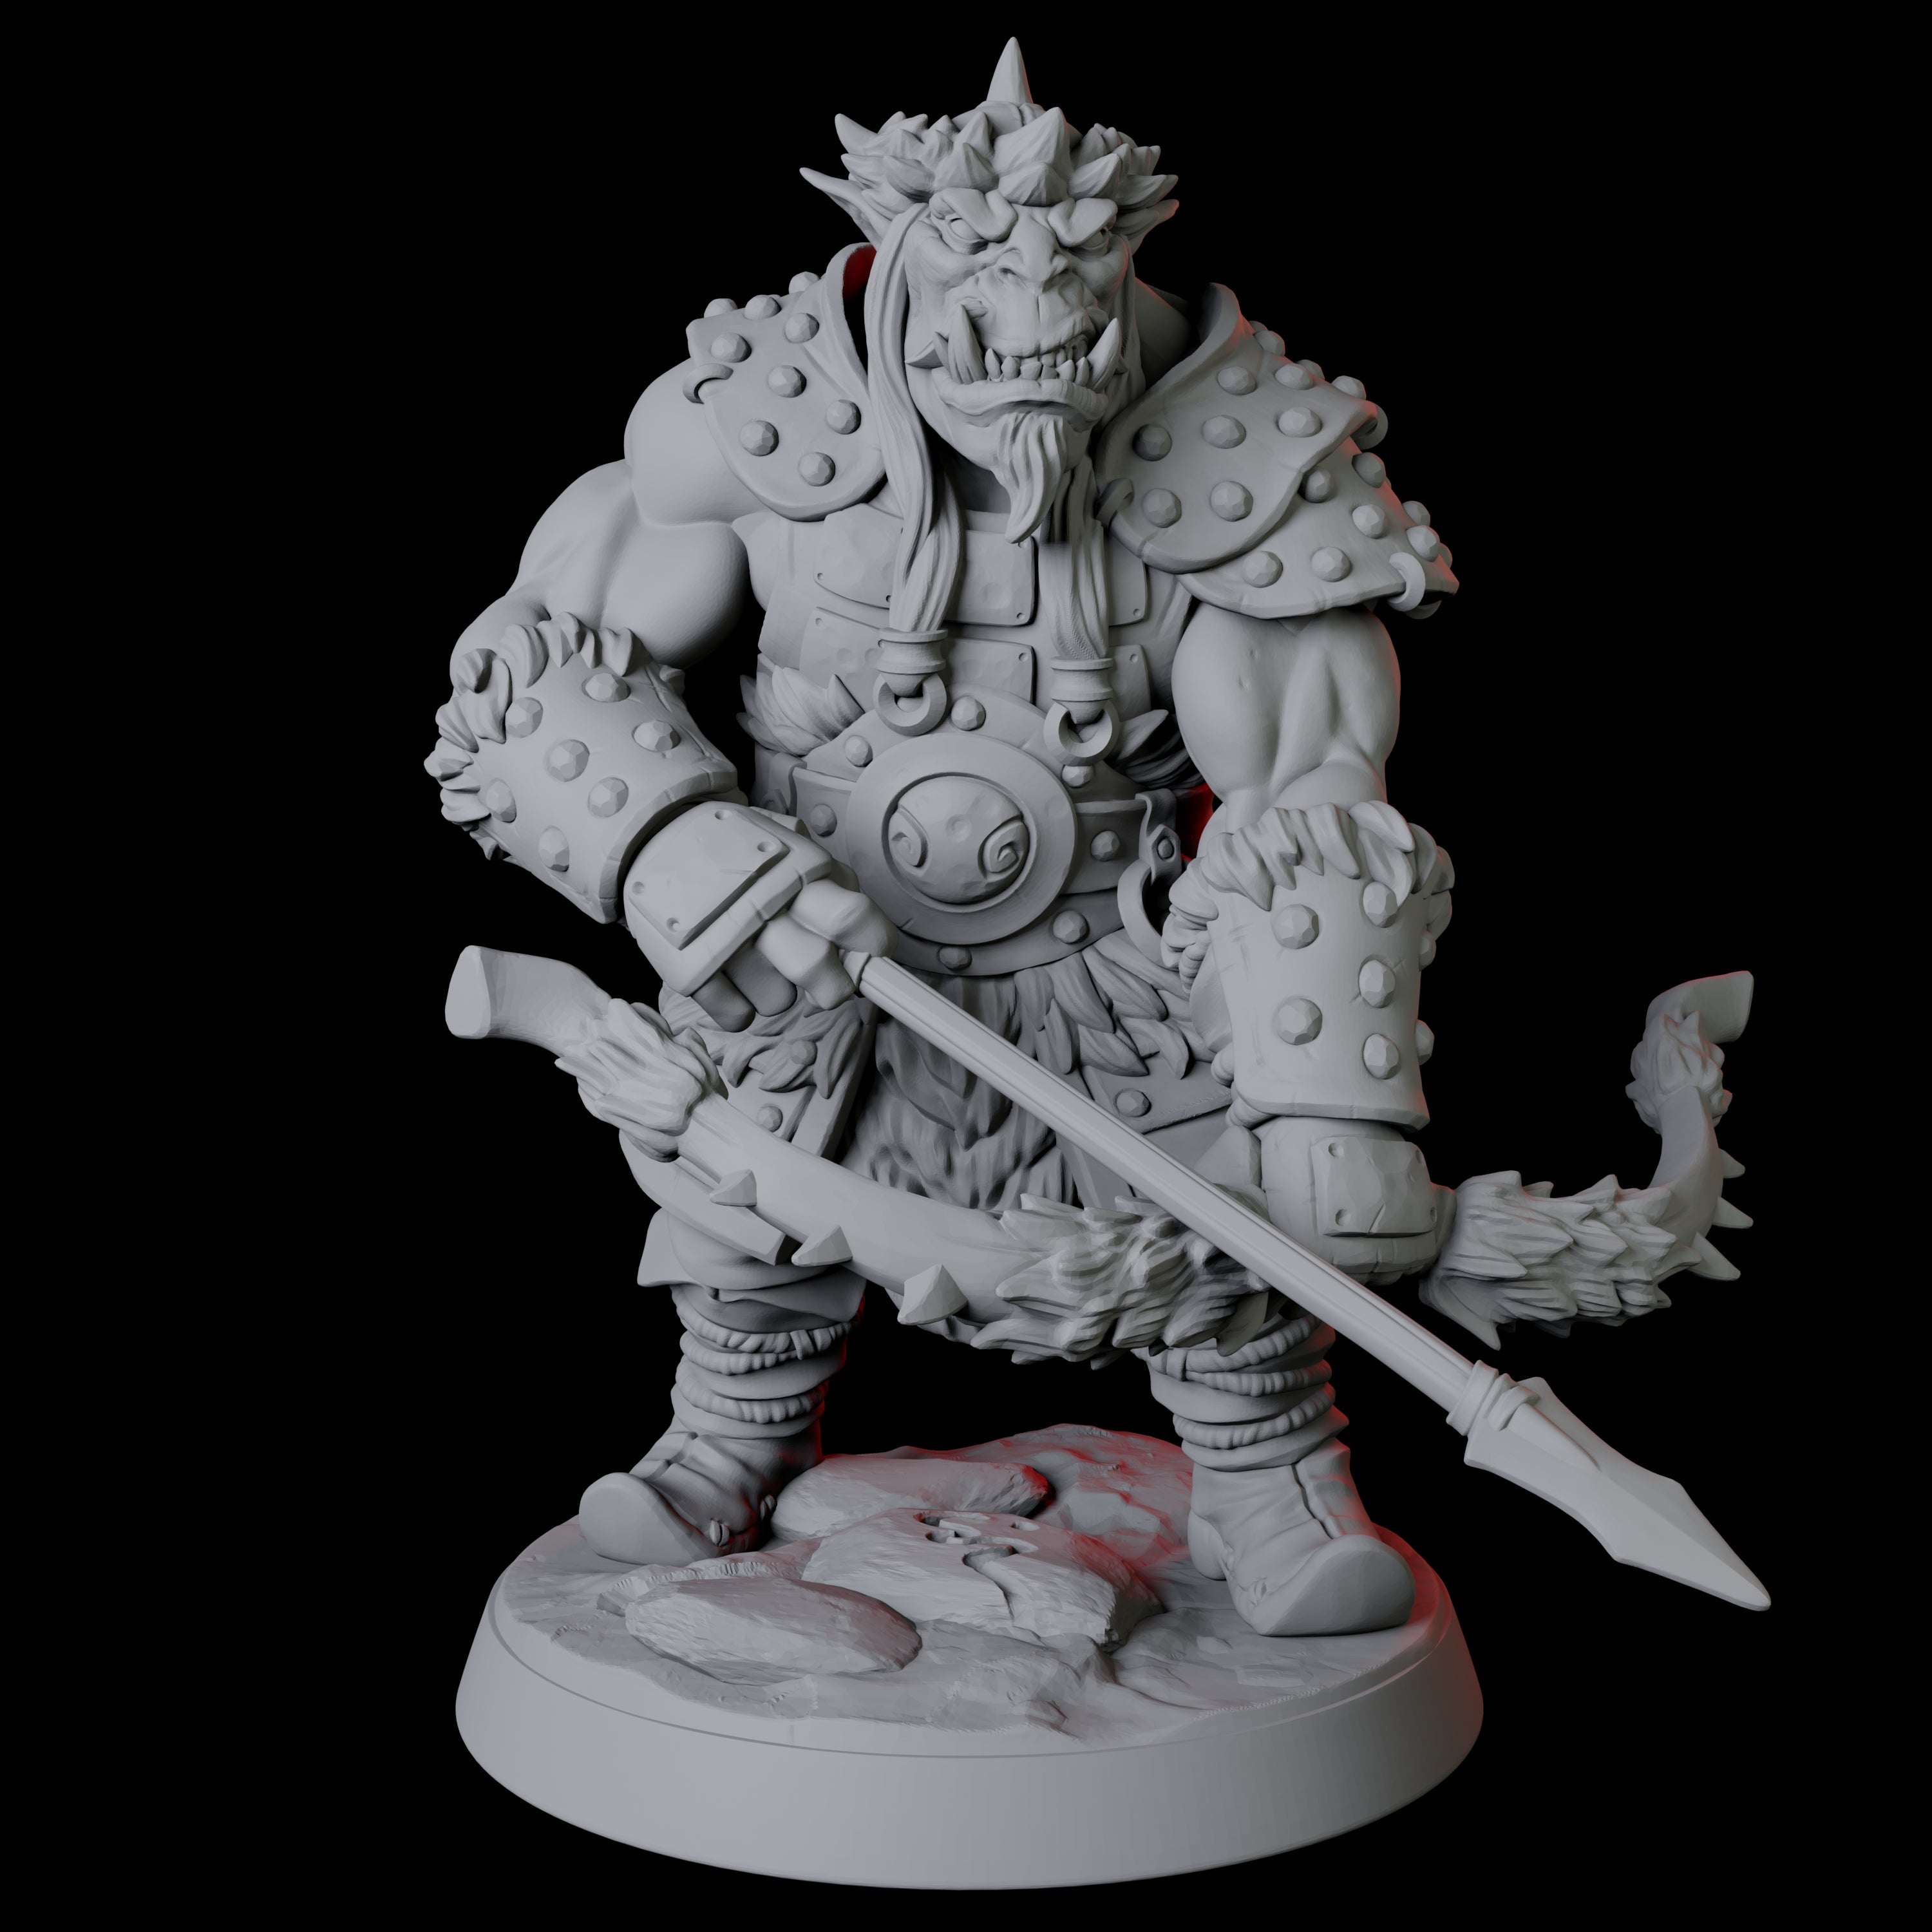 Six Mountain Orc Warriors Miniature for Dungeons and Dragons, Pathfinder or other TTRPGs